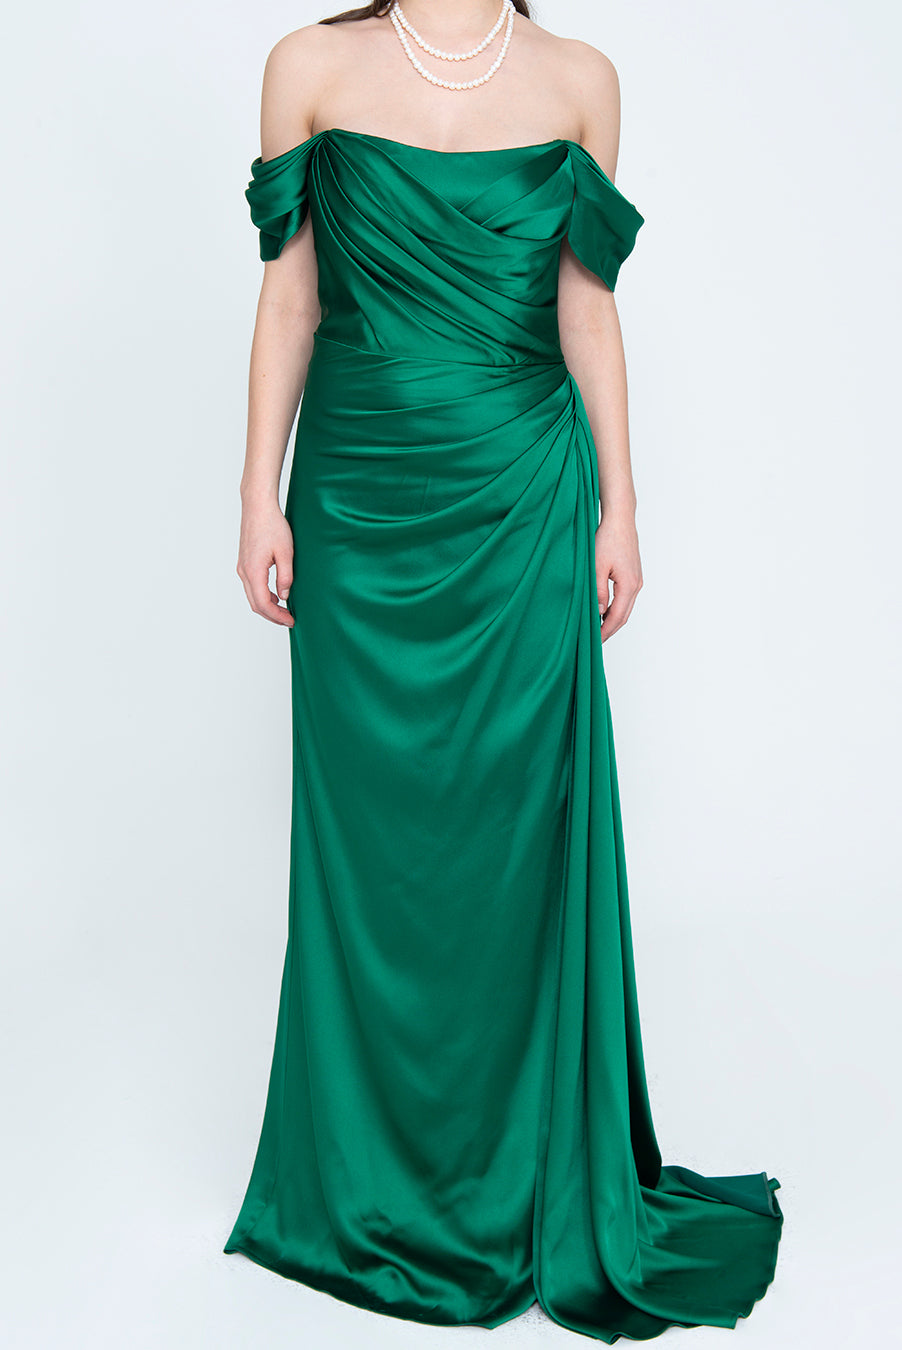 Grace - Mystic Evenings | Evening and Prom Dresses